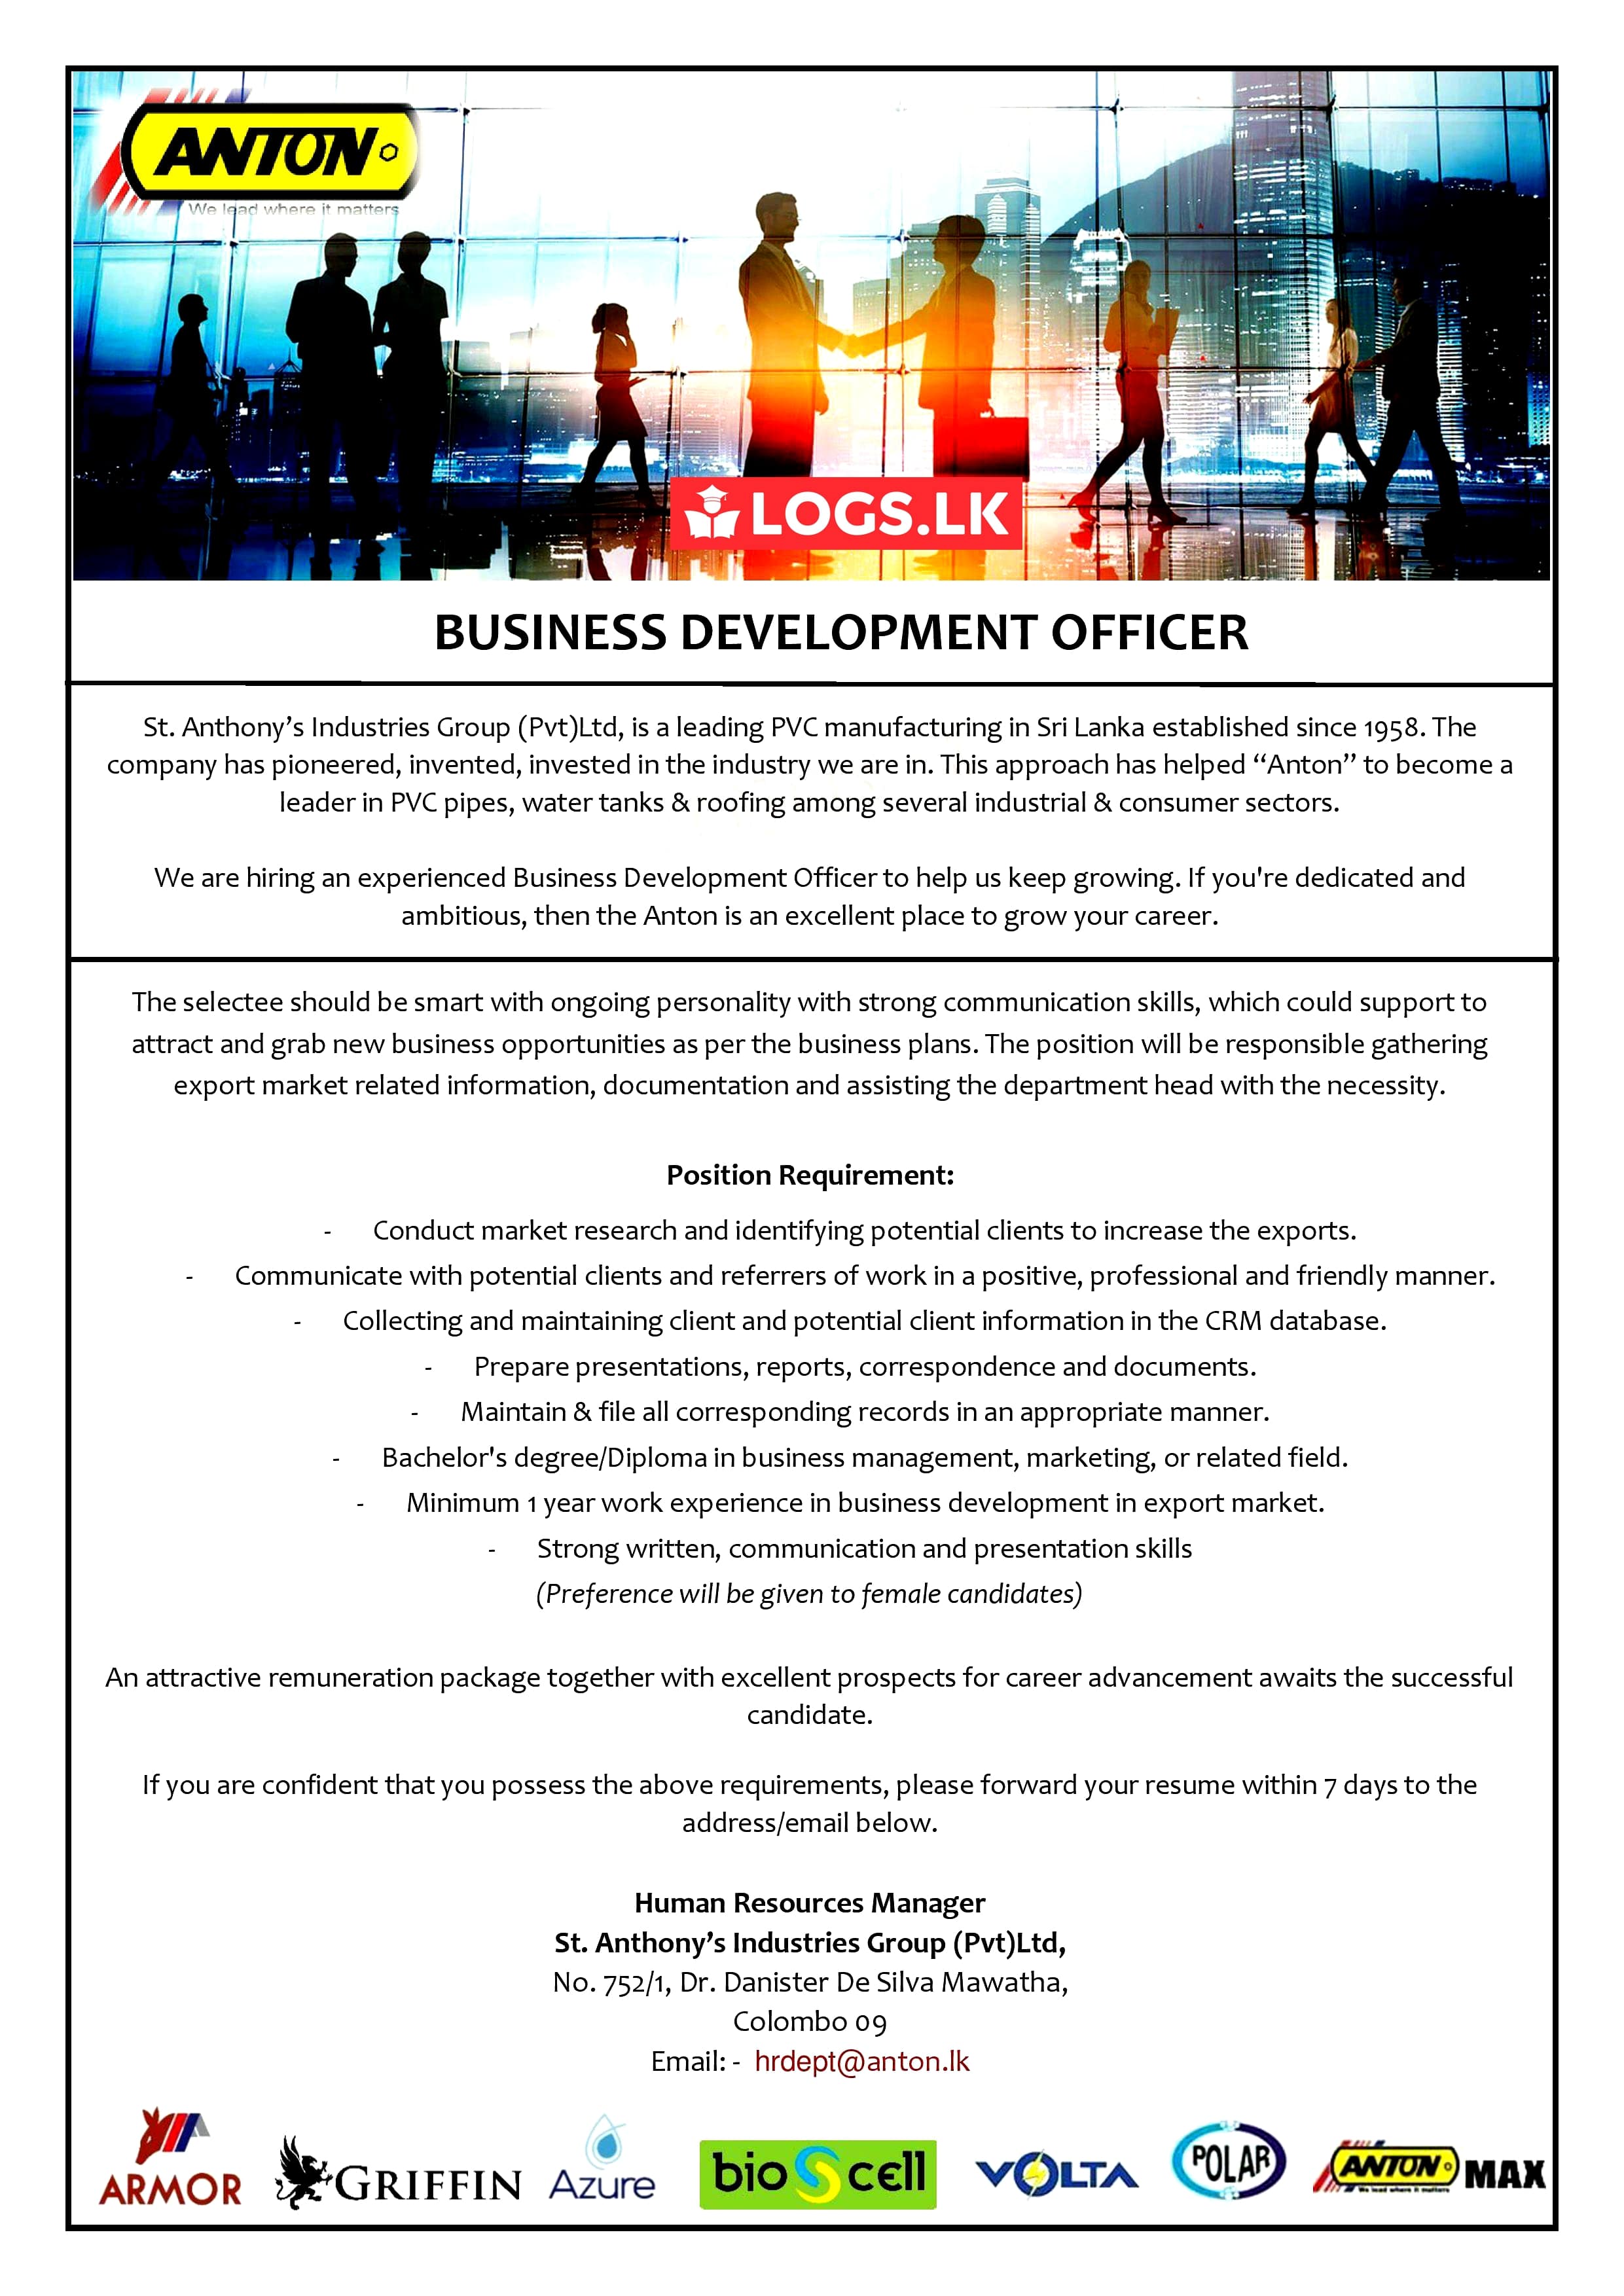 Business Development Officer - St.Anthony's Industries Group Jobs Vacancies